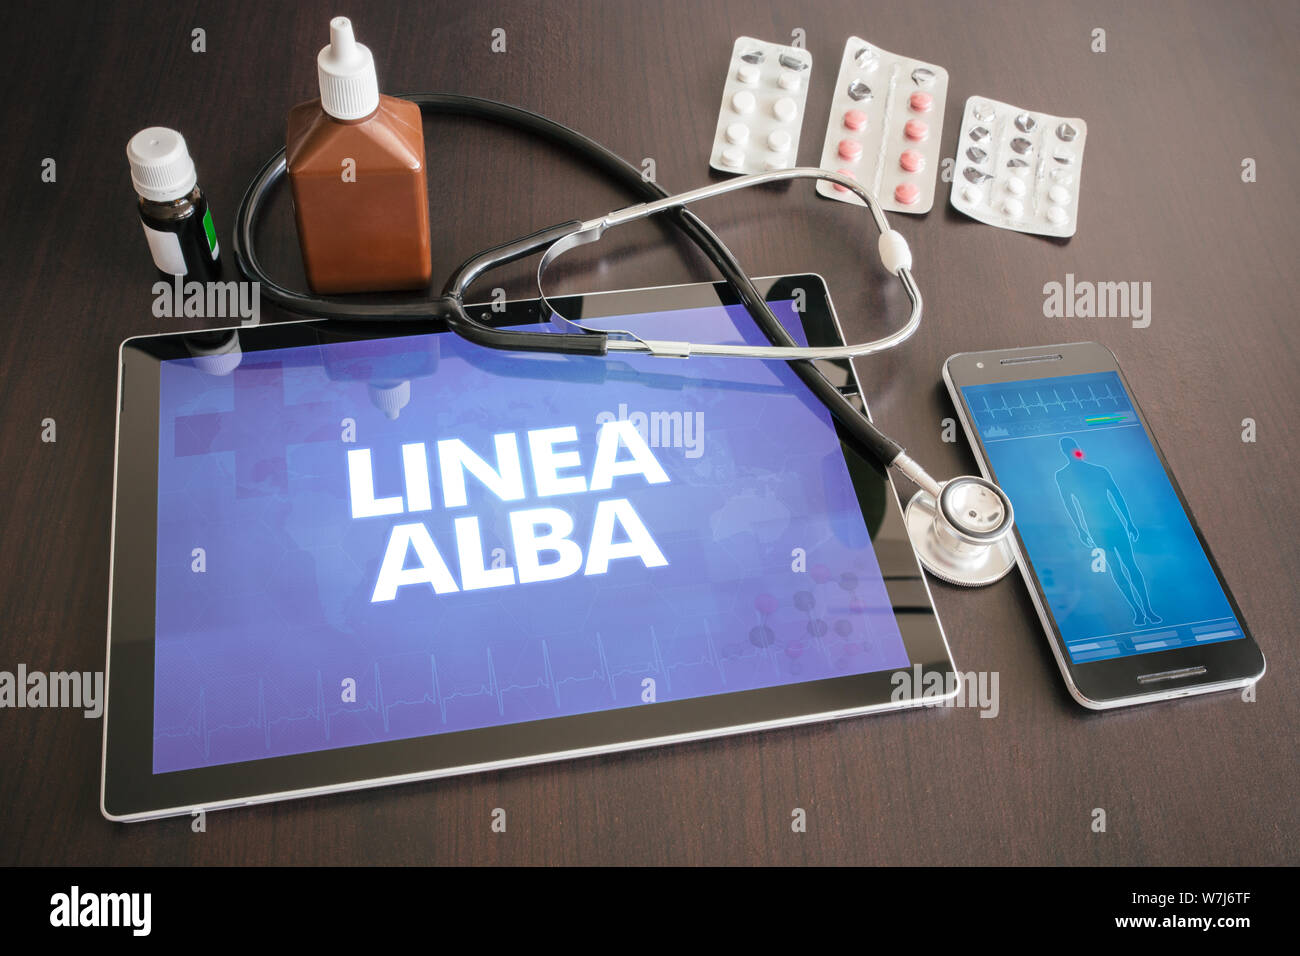 Linea alba (cutaneous disease) diagnosis medical concept on tablet screen with stethoscope. Stock Photo